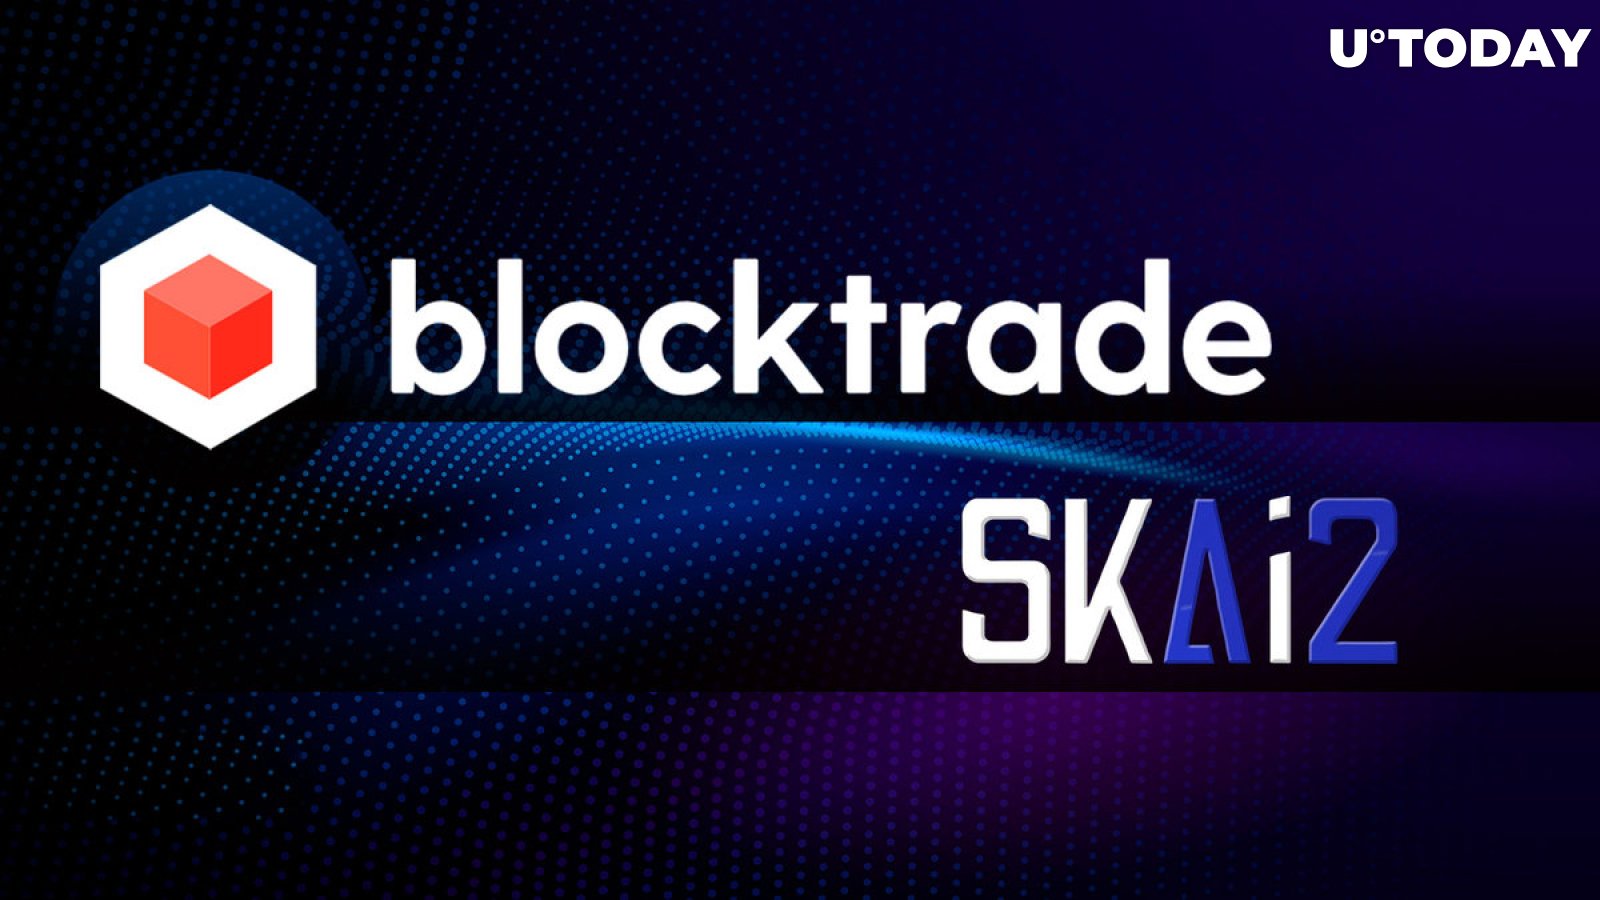 Blocktrade Integrates SKAi2 for Instant Crypto Payments in Retail